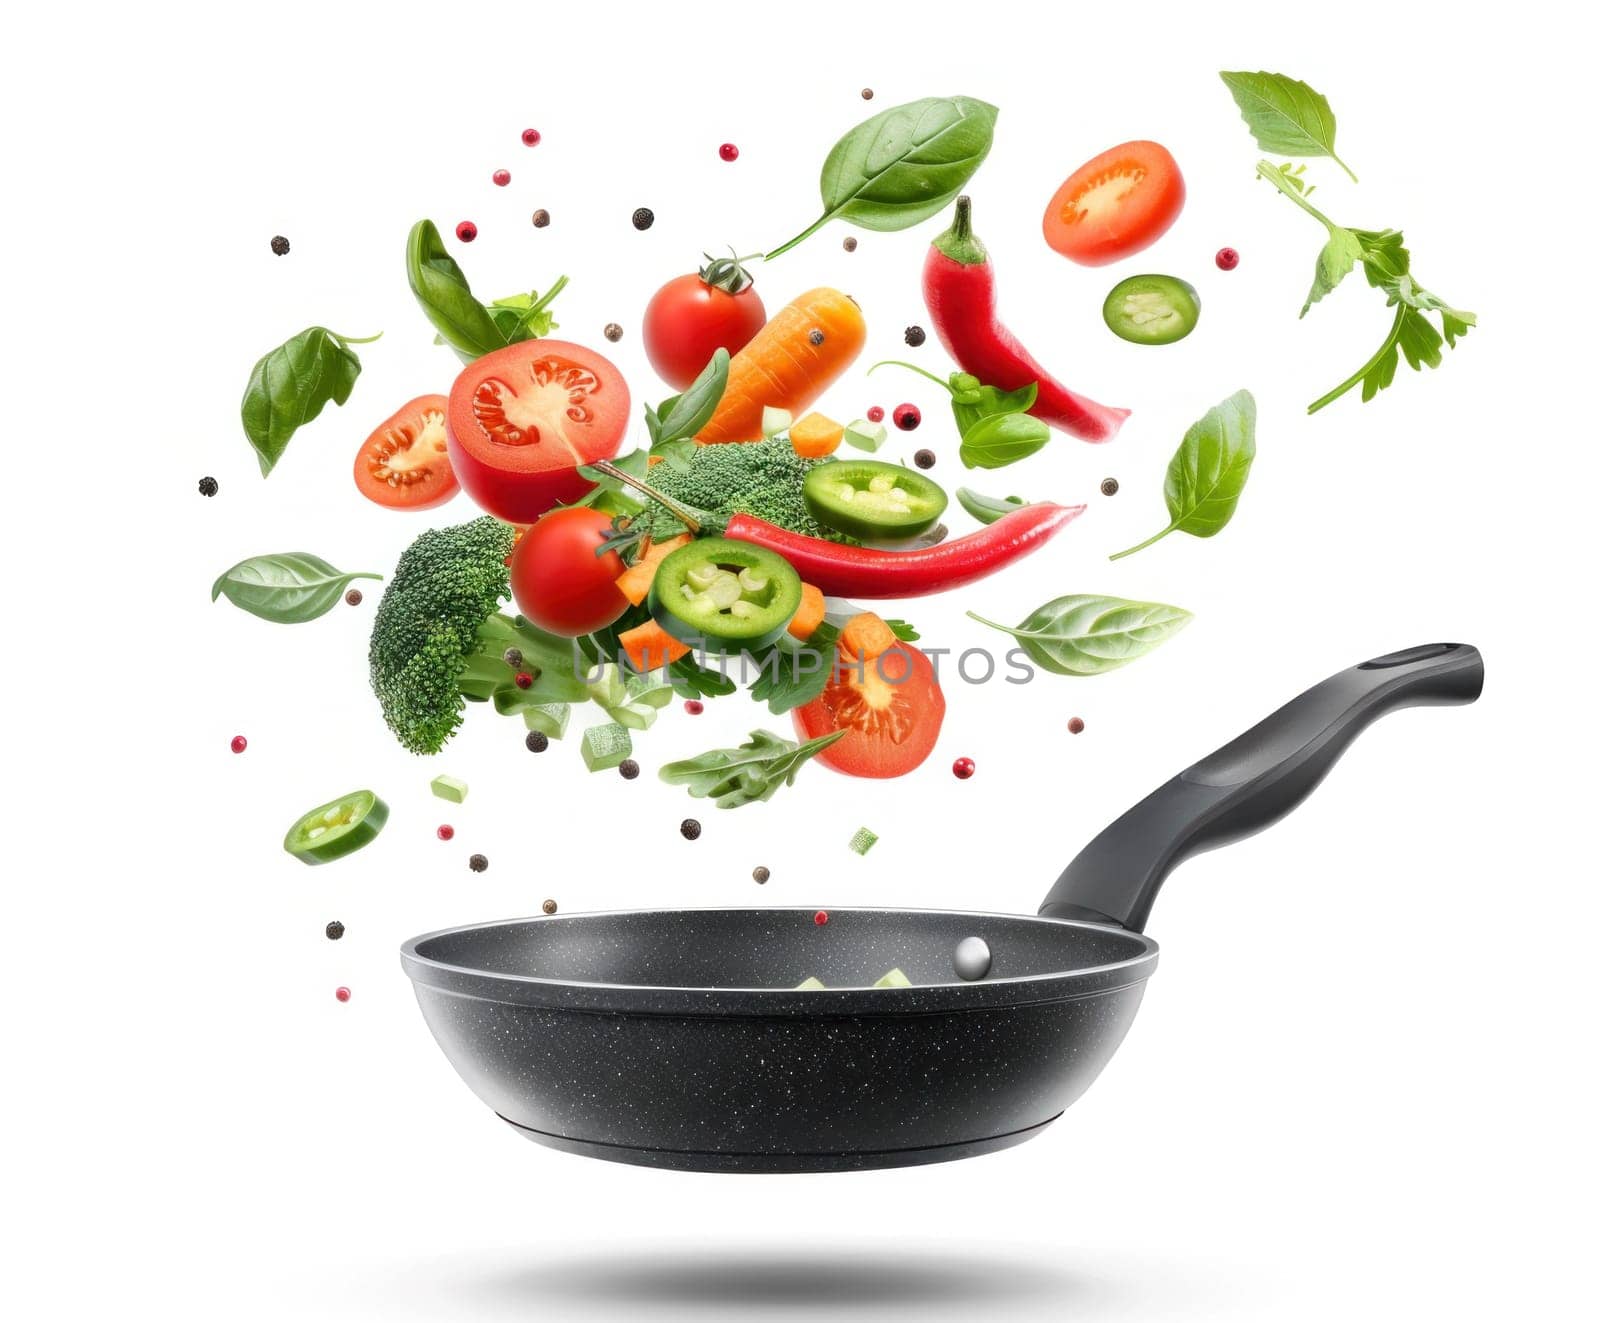 Frying pan vegetables flying out on white background, isolated organic food concept for healthy cooking and nutrition